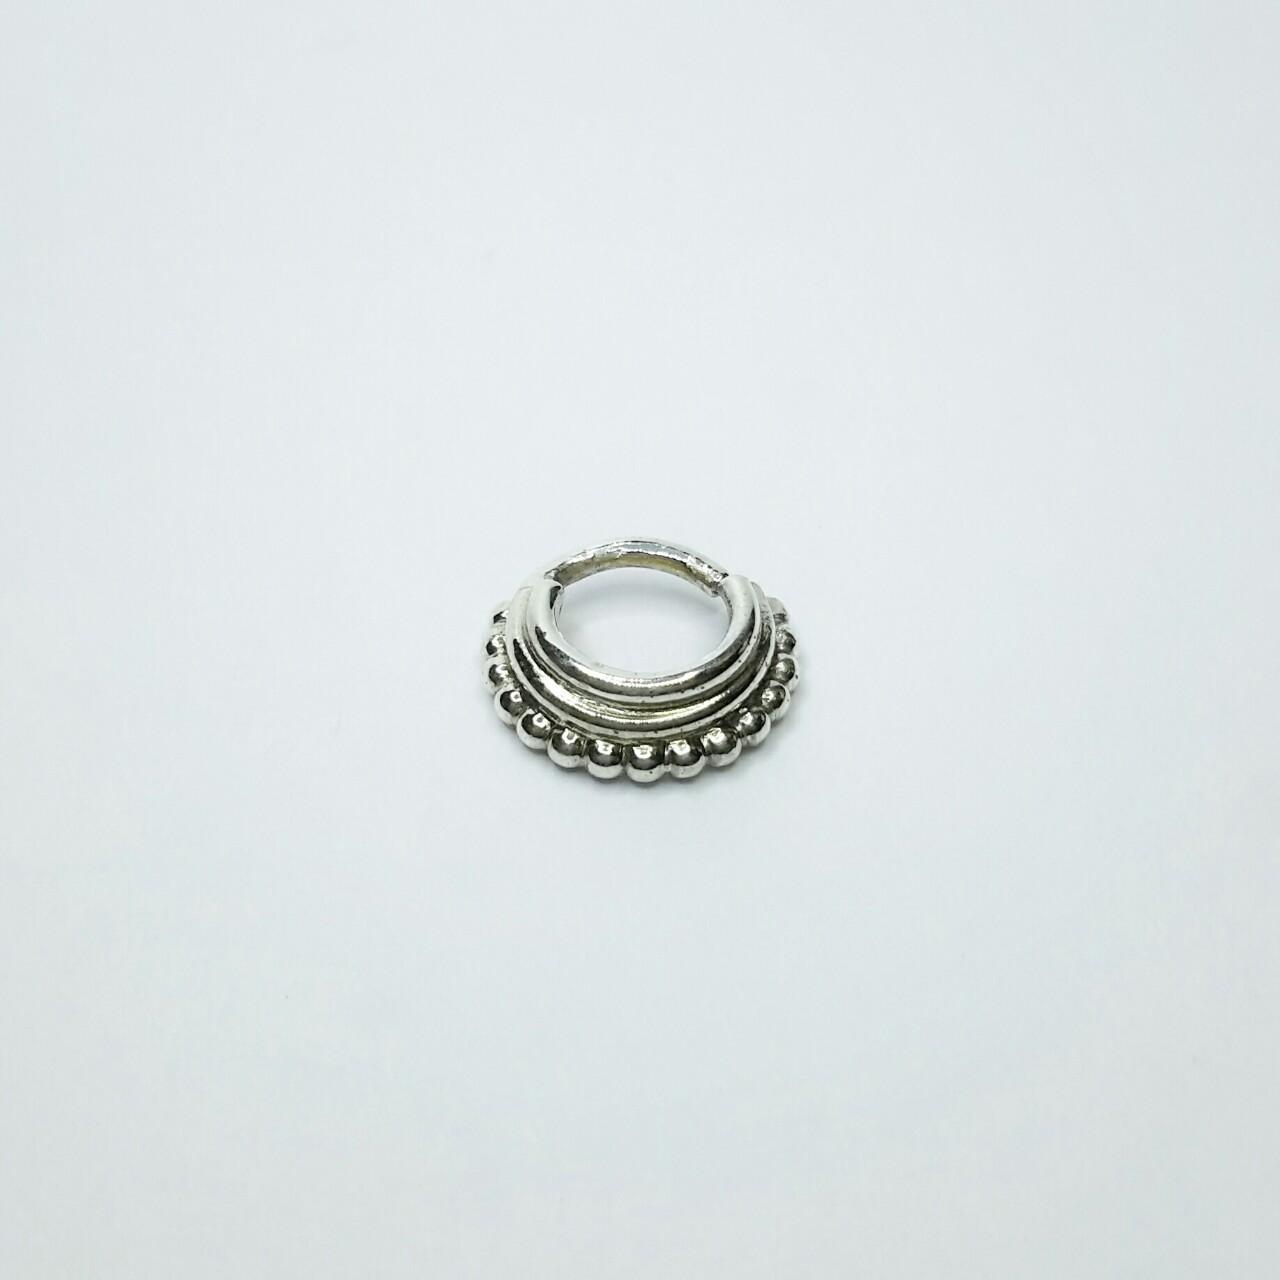 Product Image 1 - Stacked Septum Ring

Layers of polished